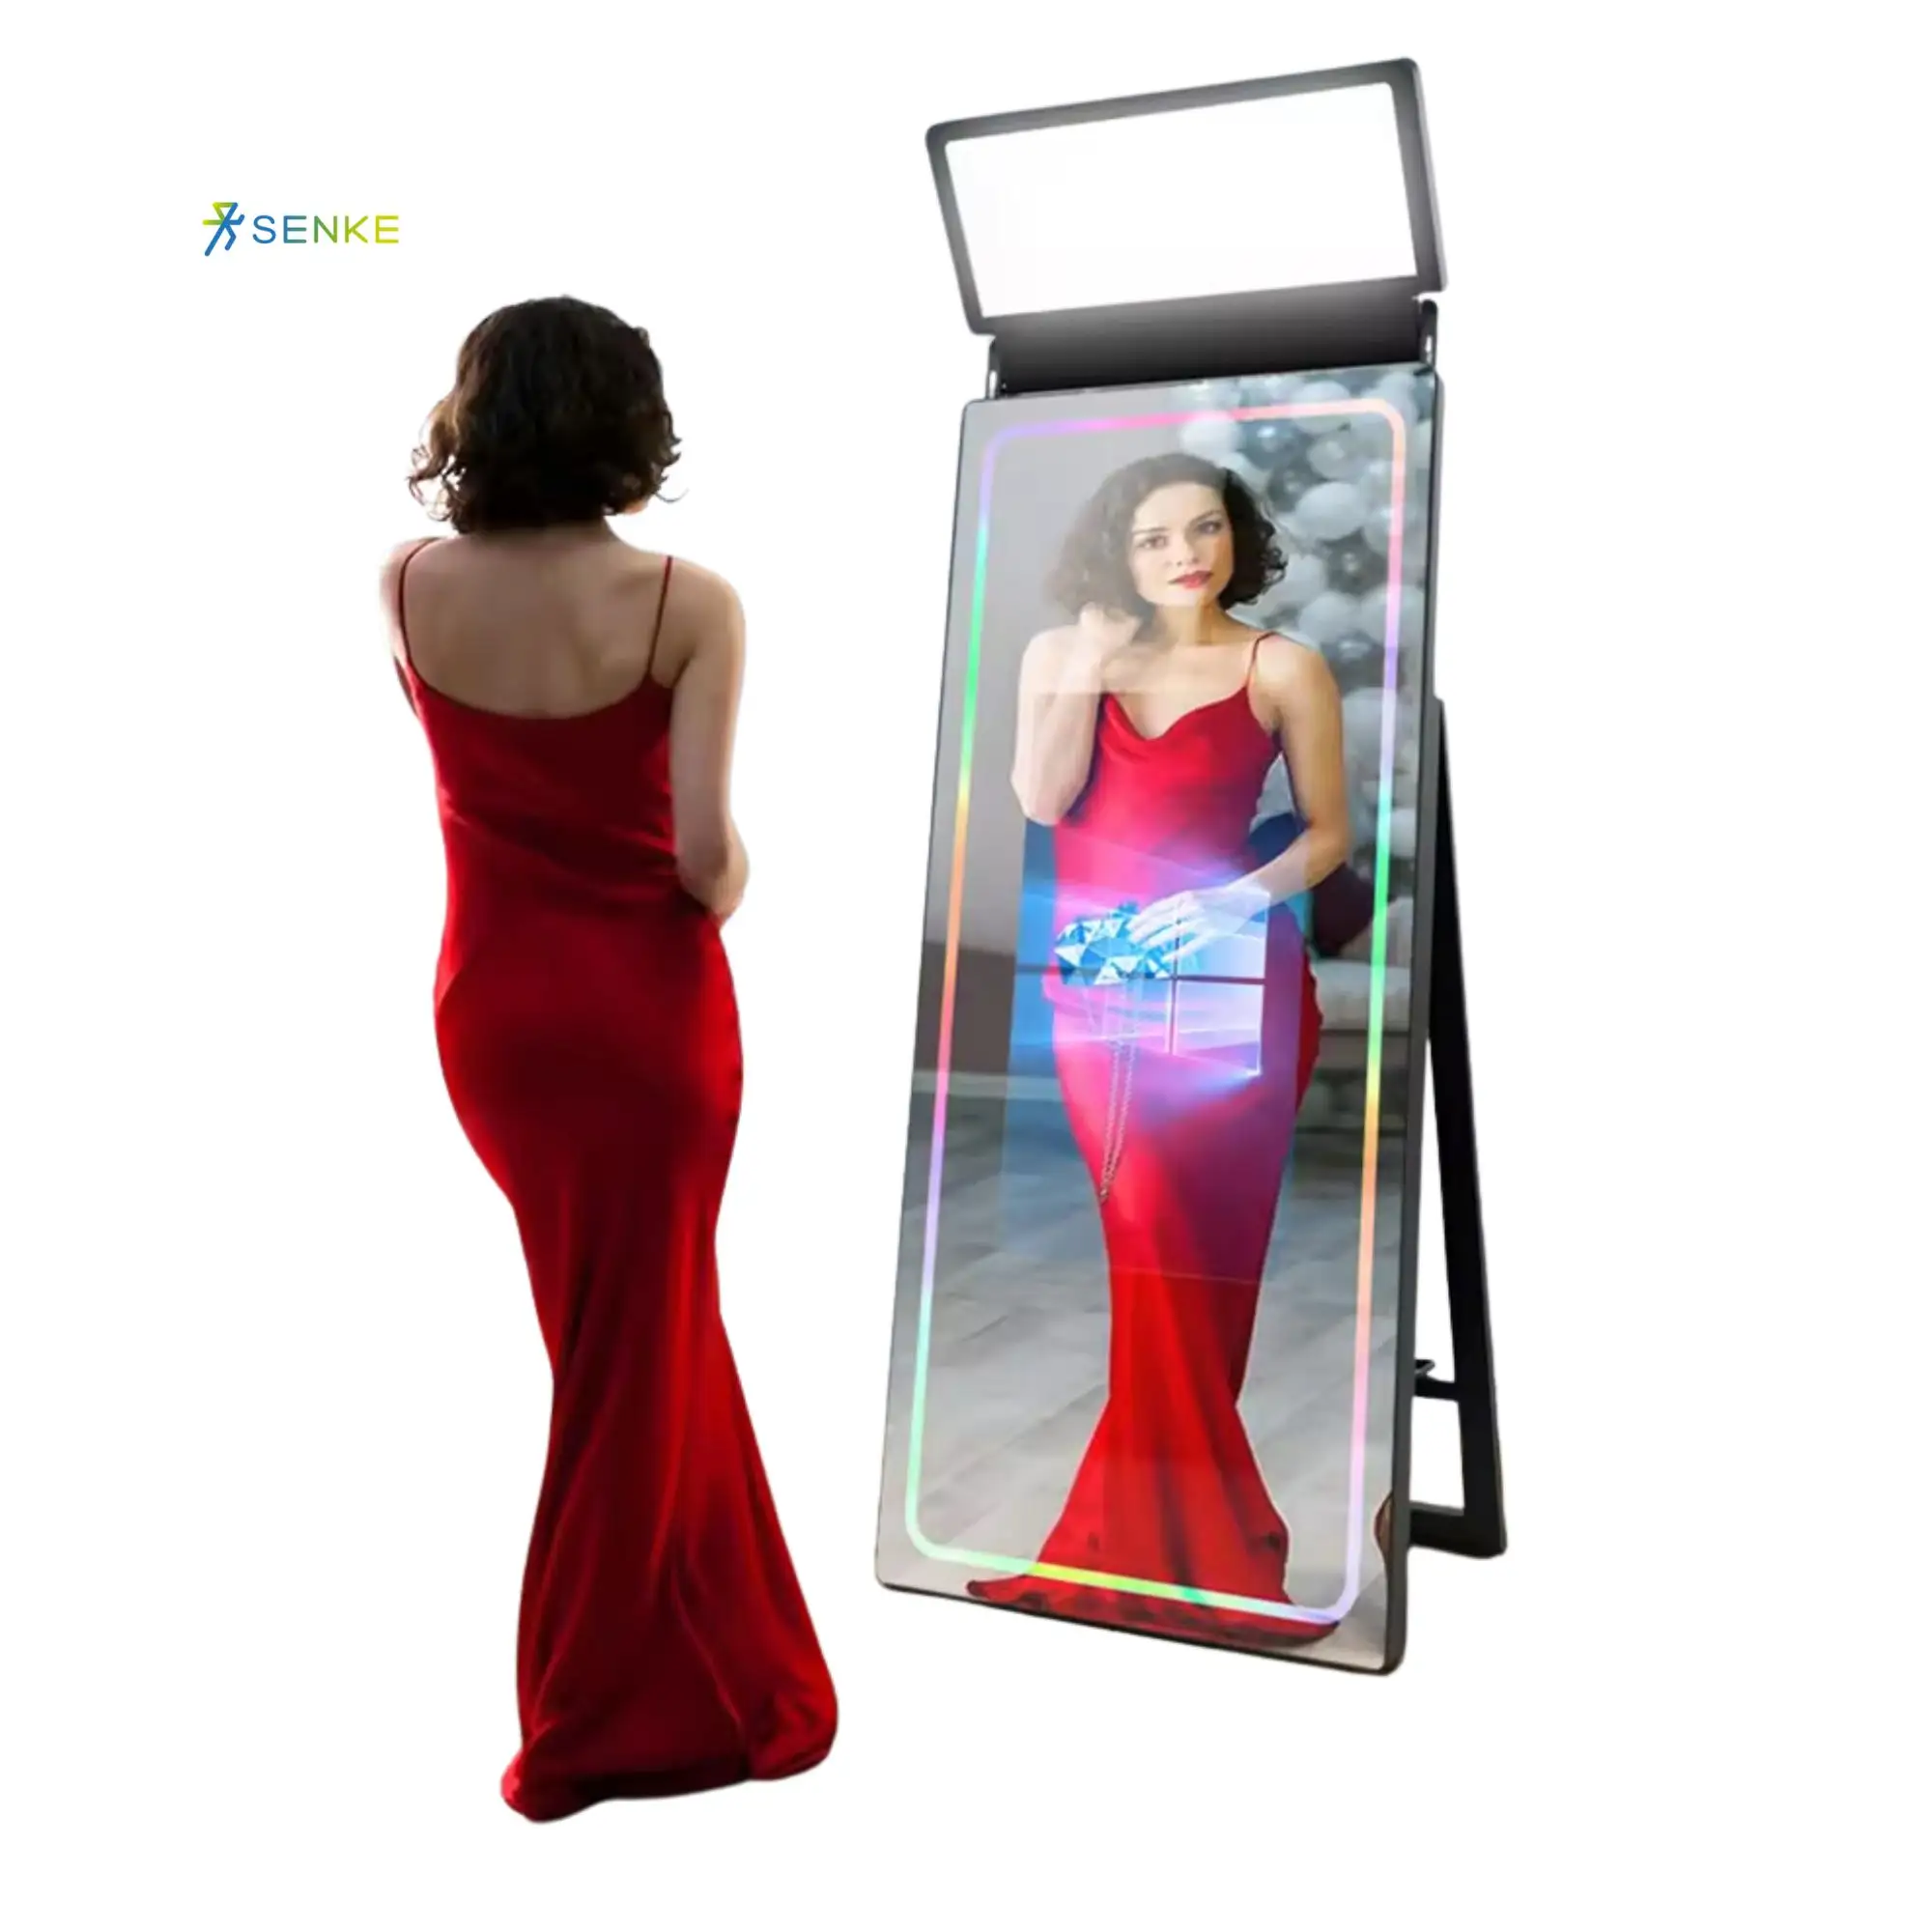 SENKE Photo Booth Machine Selfie Photo Booth For Party Screen Magic Mirror Photo Booth For Sale Selfie